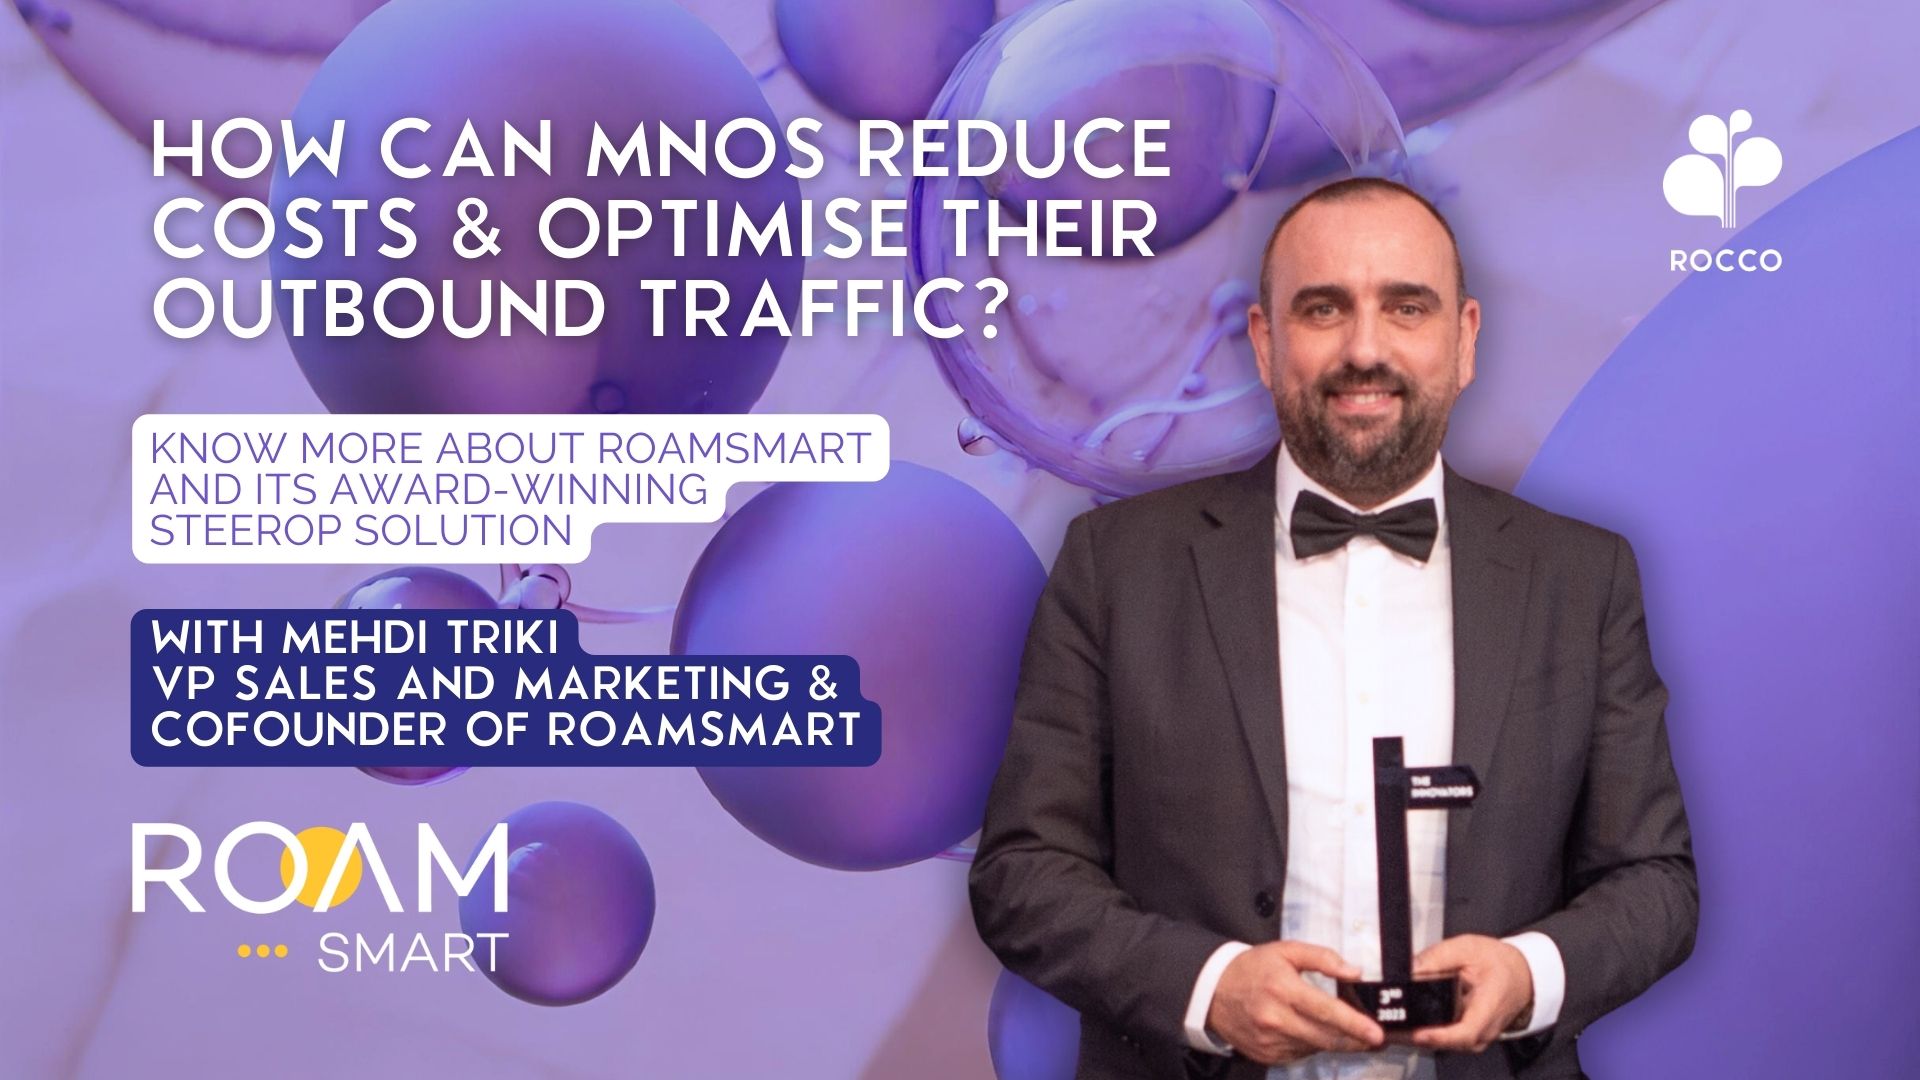 How can MNOs reduce costs and optimise their outbound traffic?